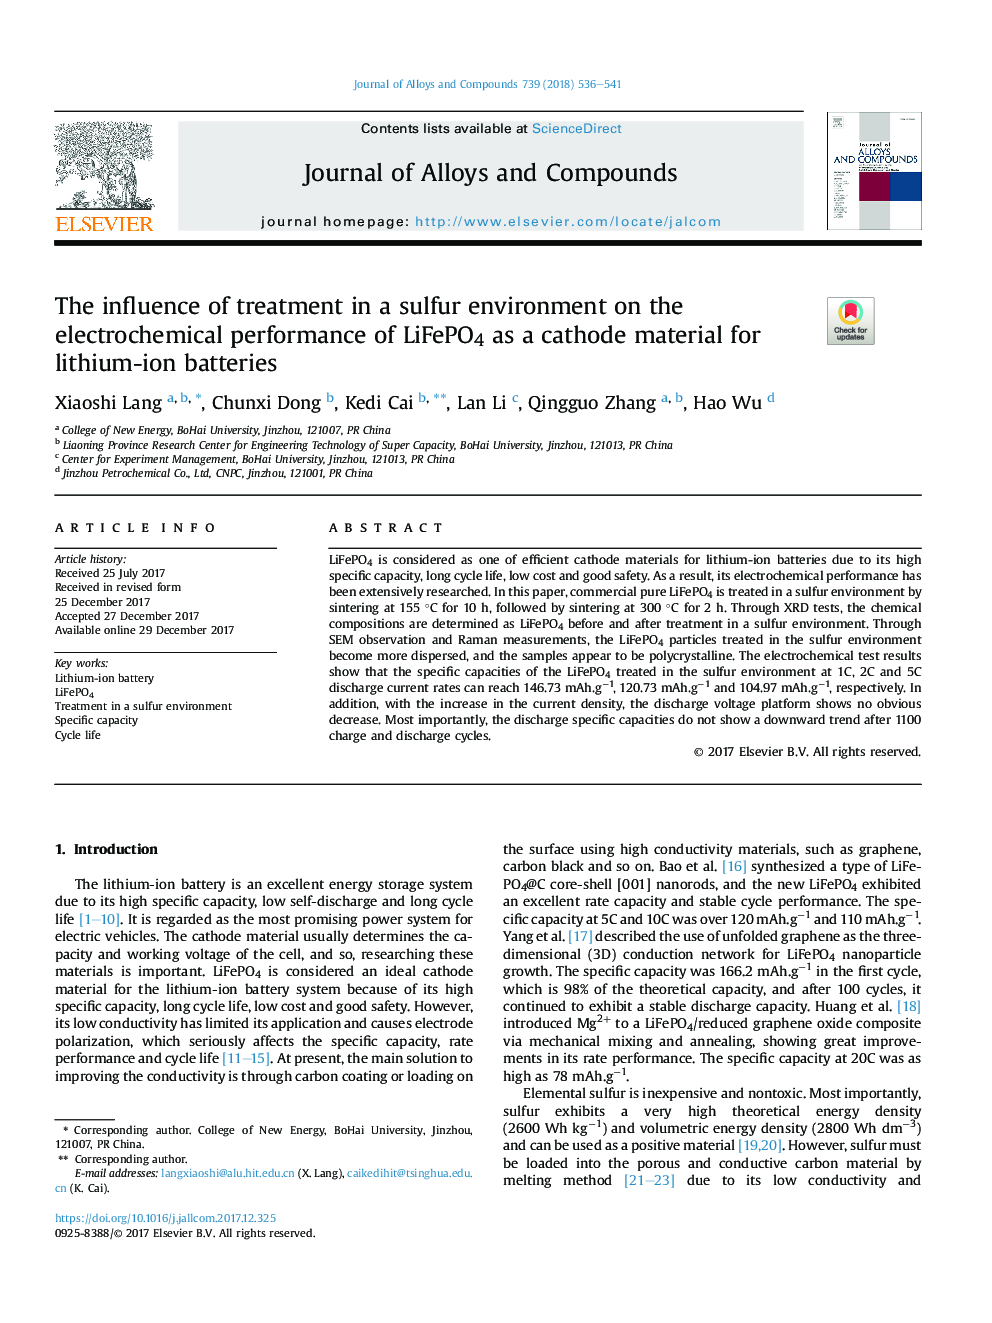 The influence of treatment in a sulfur environment on the electrochemical performance of LiFePO4 as a cathode material for lithium-ion batteries